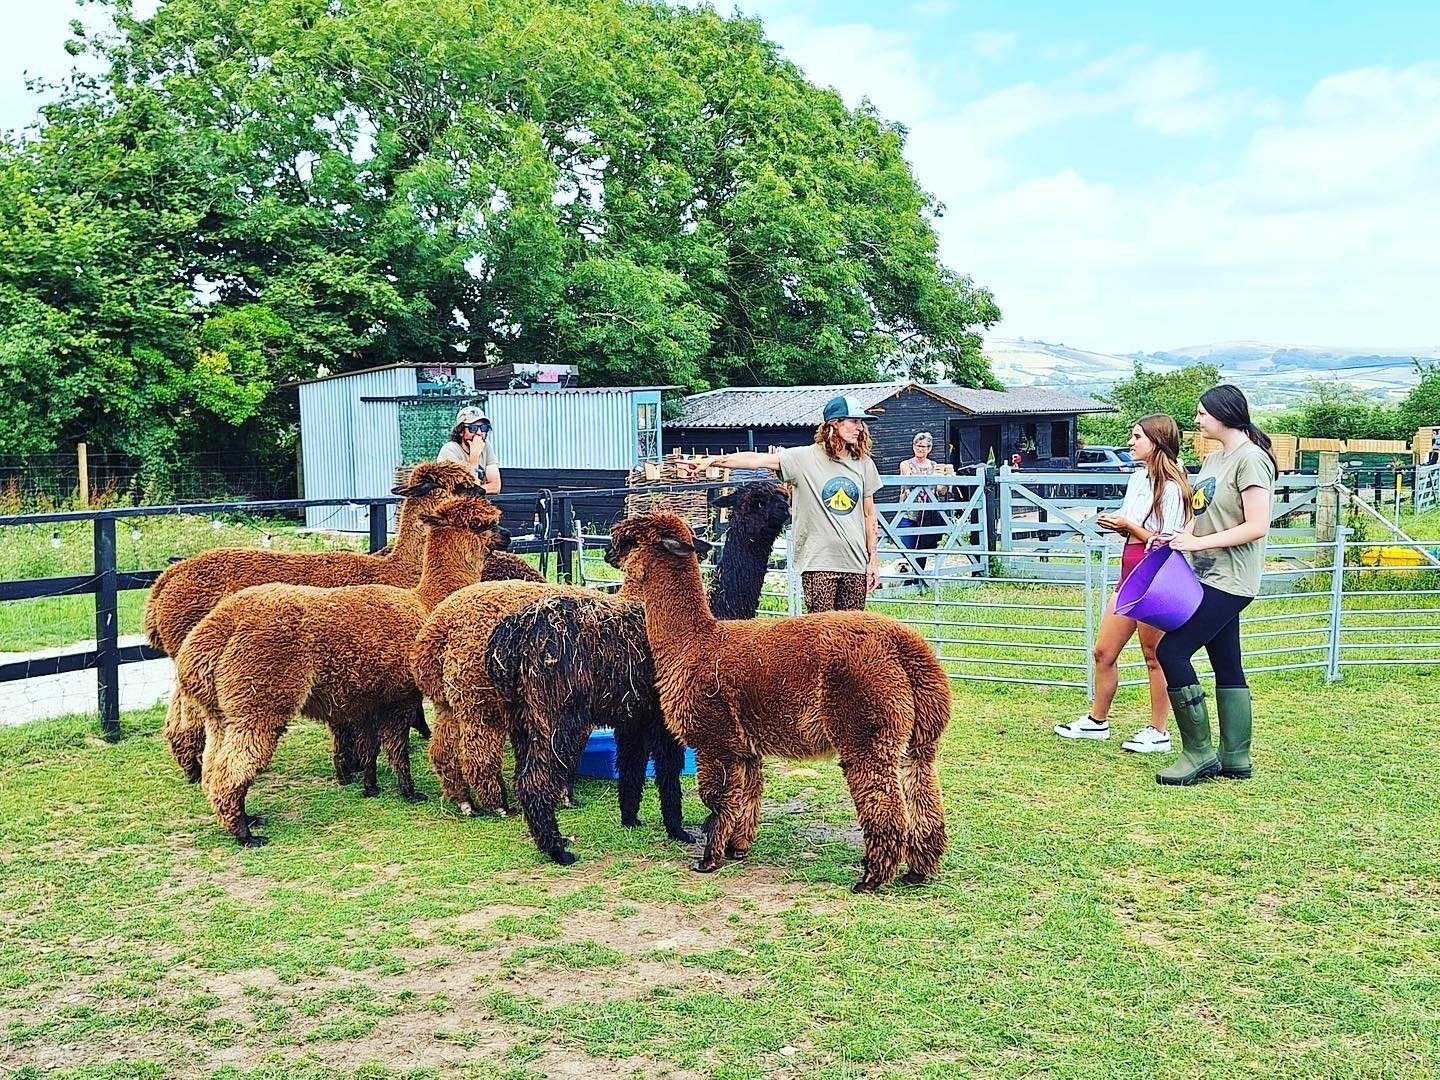 A group of people stand in a field feeding a pack of Alpacas, with a campsite in the background